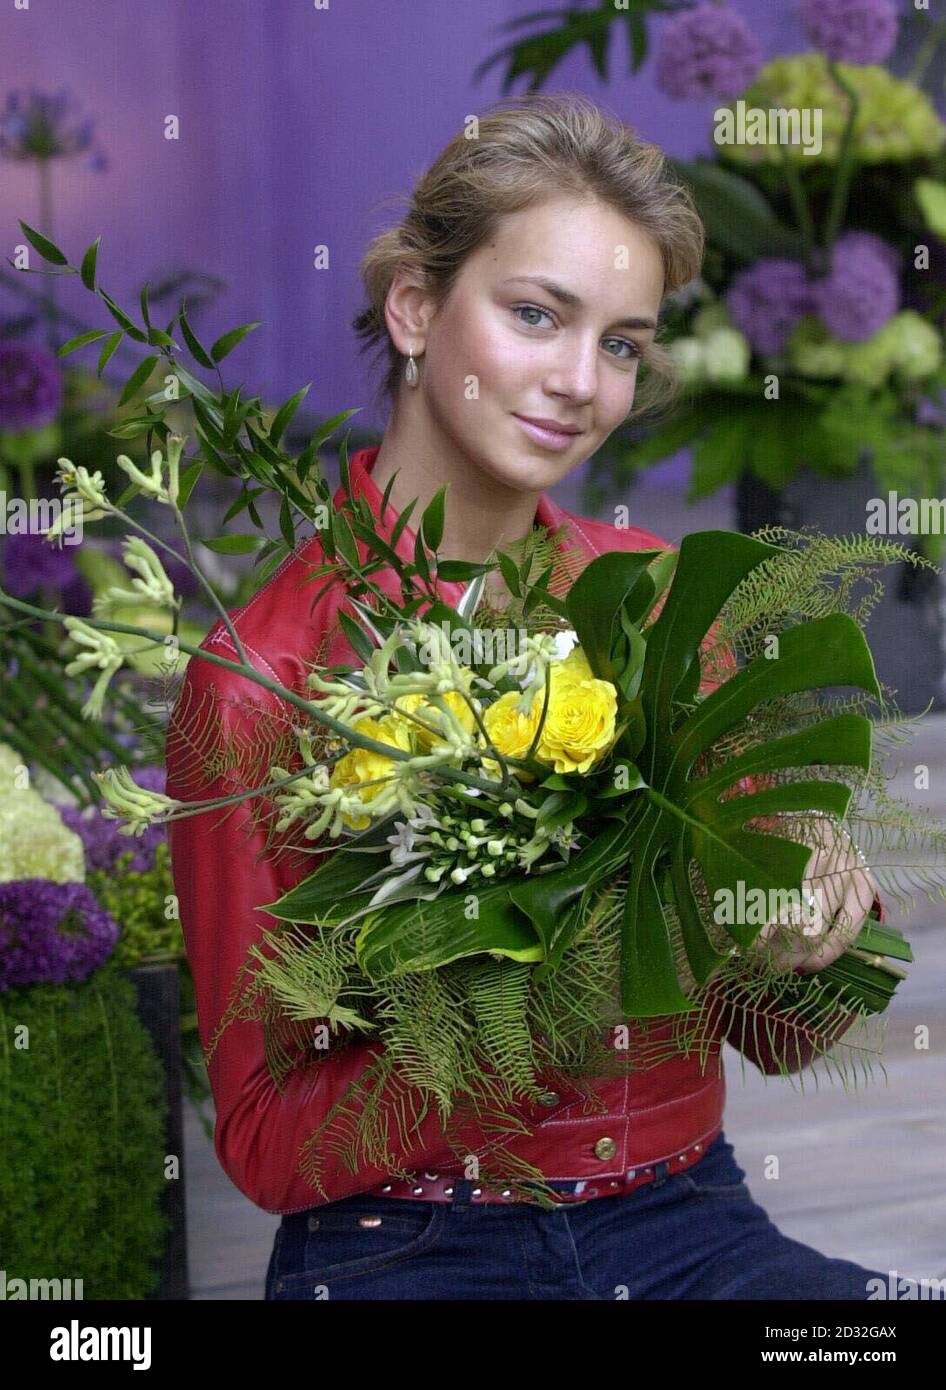 Model and IT girl, Isabella Hervey, sister of Lady Victoria Hervey, with the Teleflorist 'Bouquet of Hope' charity flowers at Chelsea Flower Show.    *  The final touches were today being put in place on more than 600 exhibits in this year's Chelsea Flower Show in preparation for a visit from the Queen and the Duke of Edinburgh. It is also expected that the Prince of Wales, the Duke of York and the Earl and Countess of Wessex will visit the show. Stock Photo